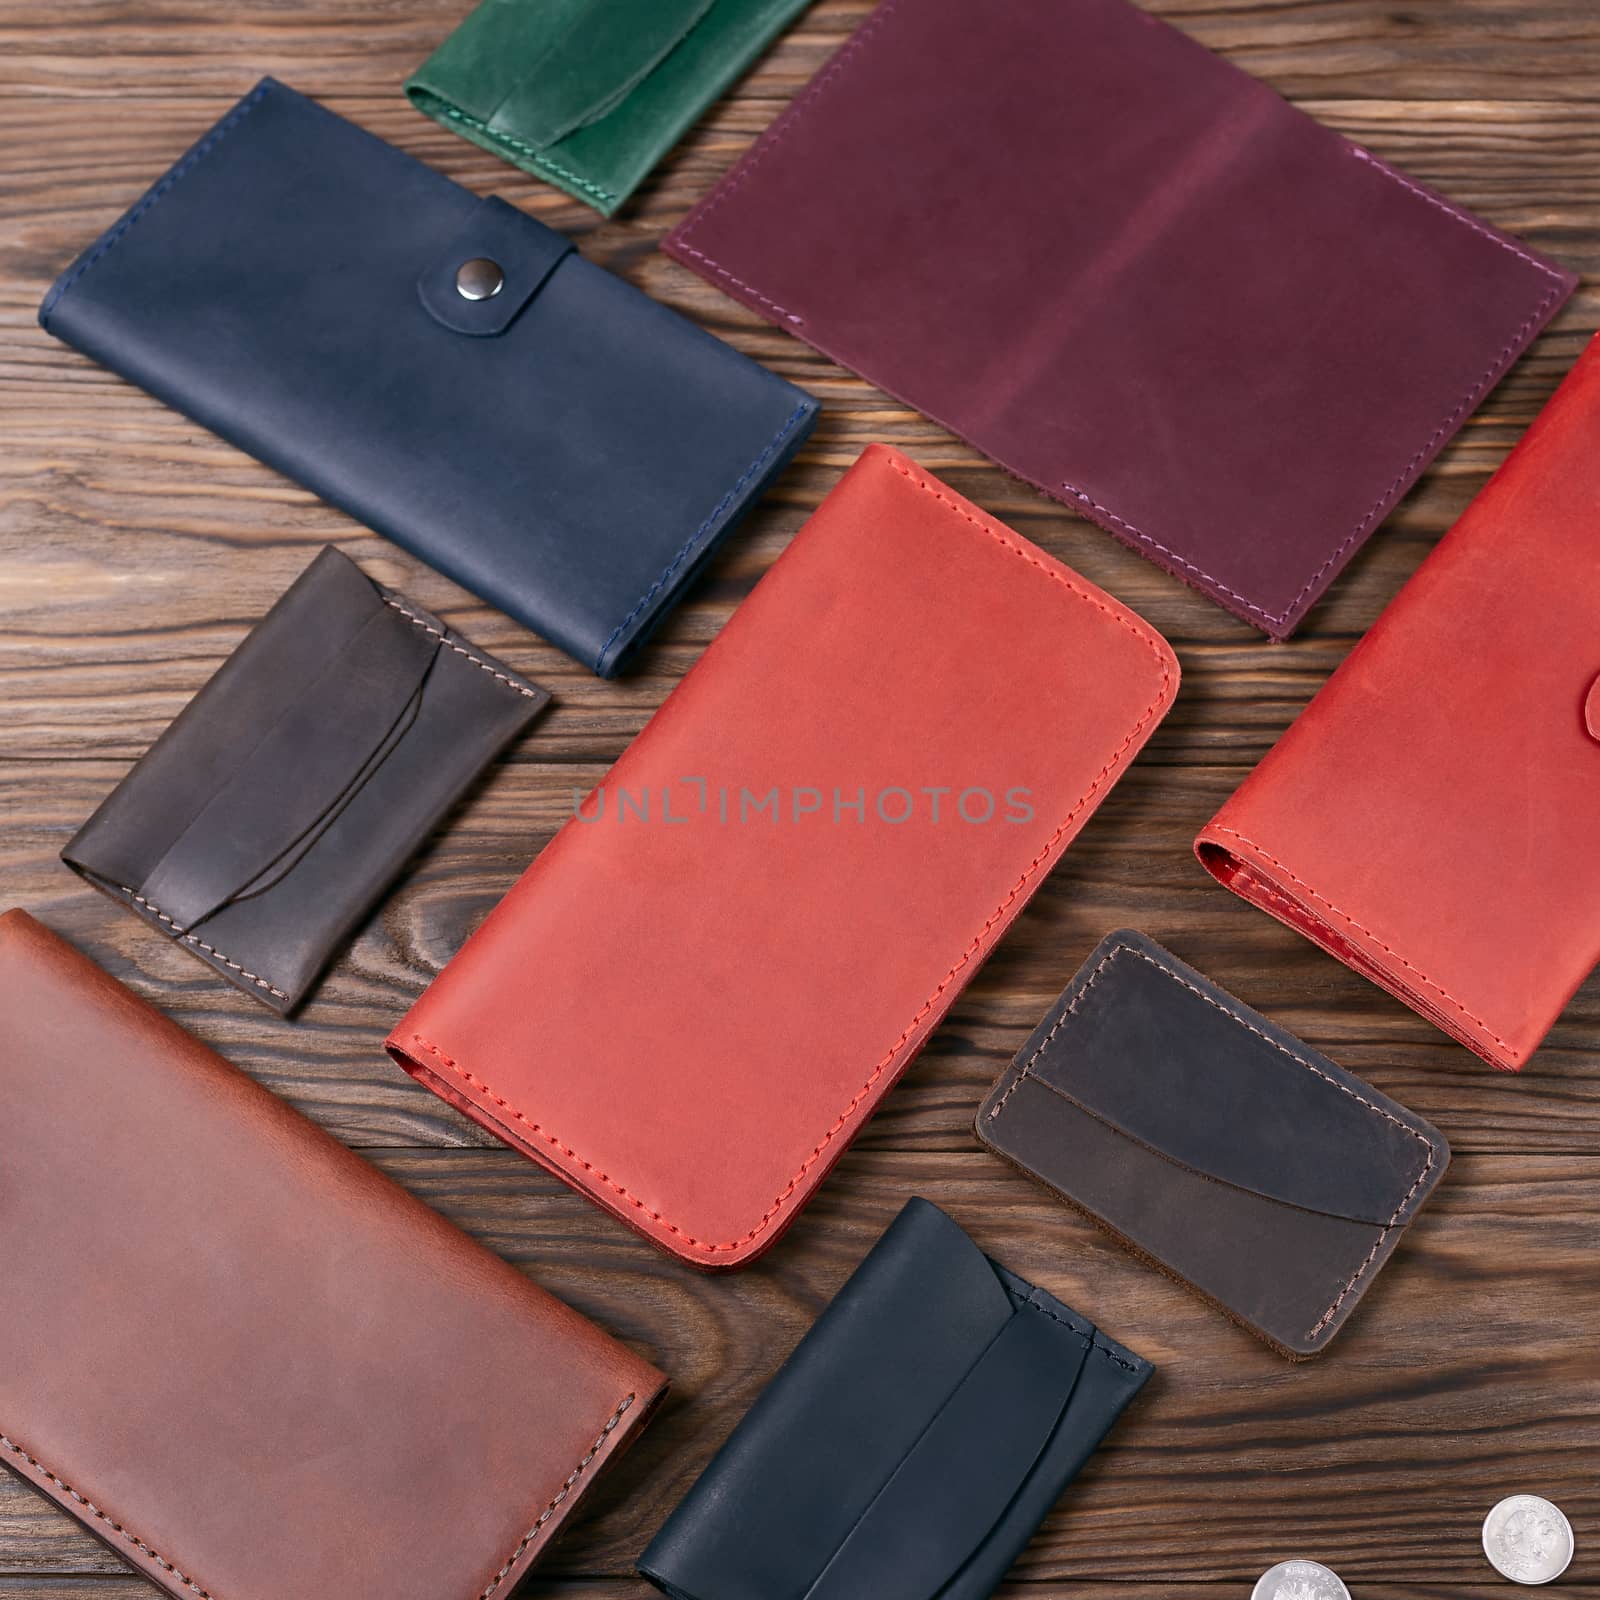 Red color handmade leather porte-monnaie surrounded by other leather accessories on wooden textured background. Side view. Stock photo of luxury accessories. by alexsdriver